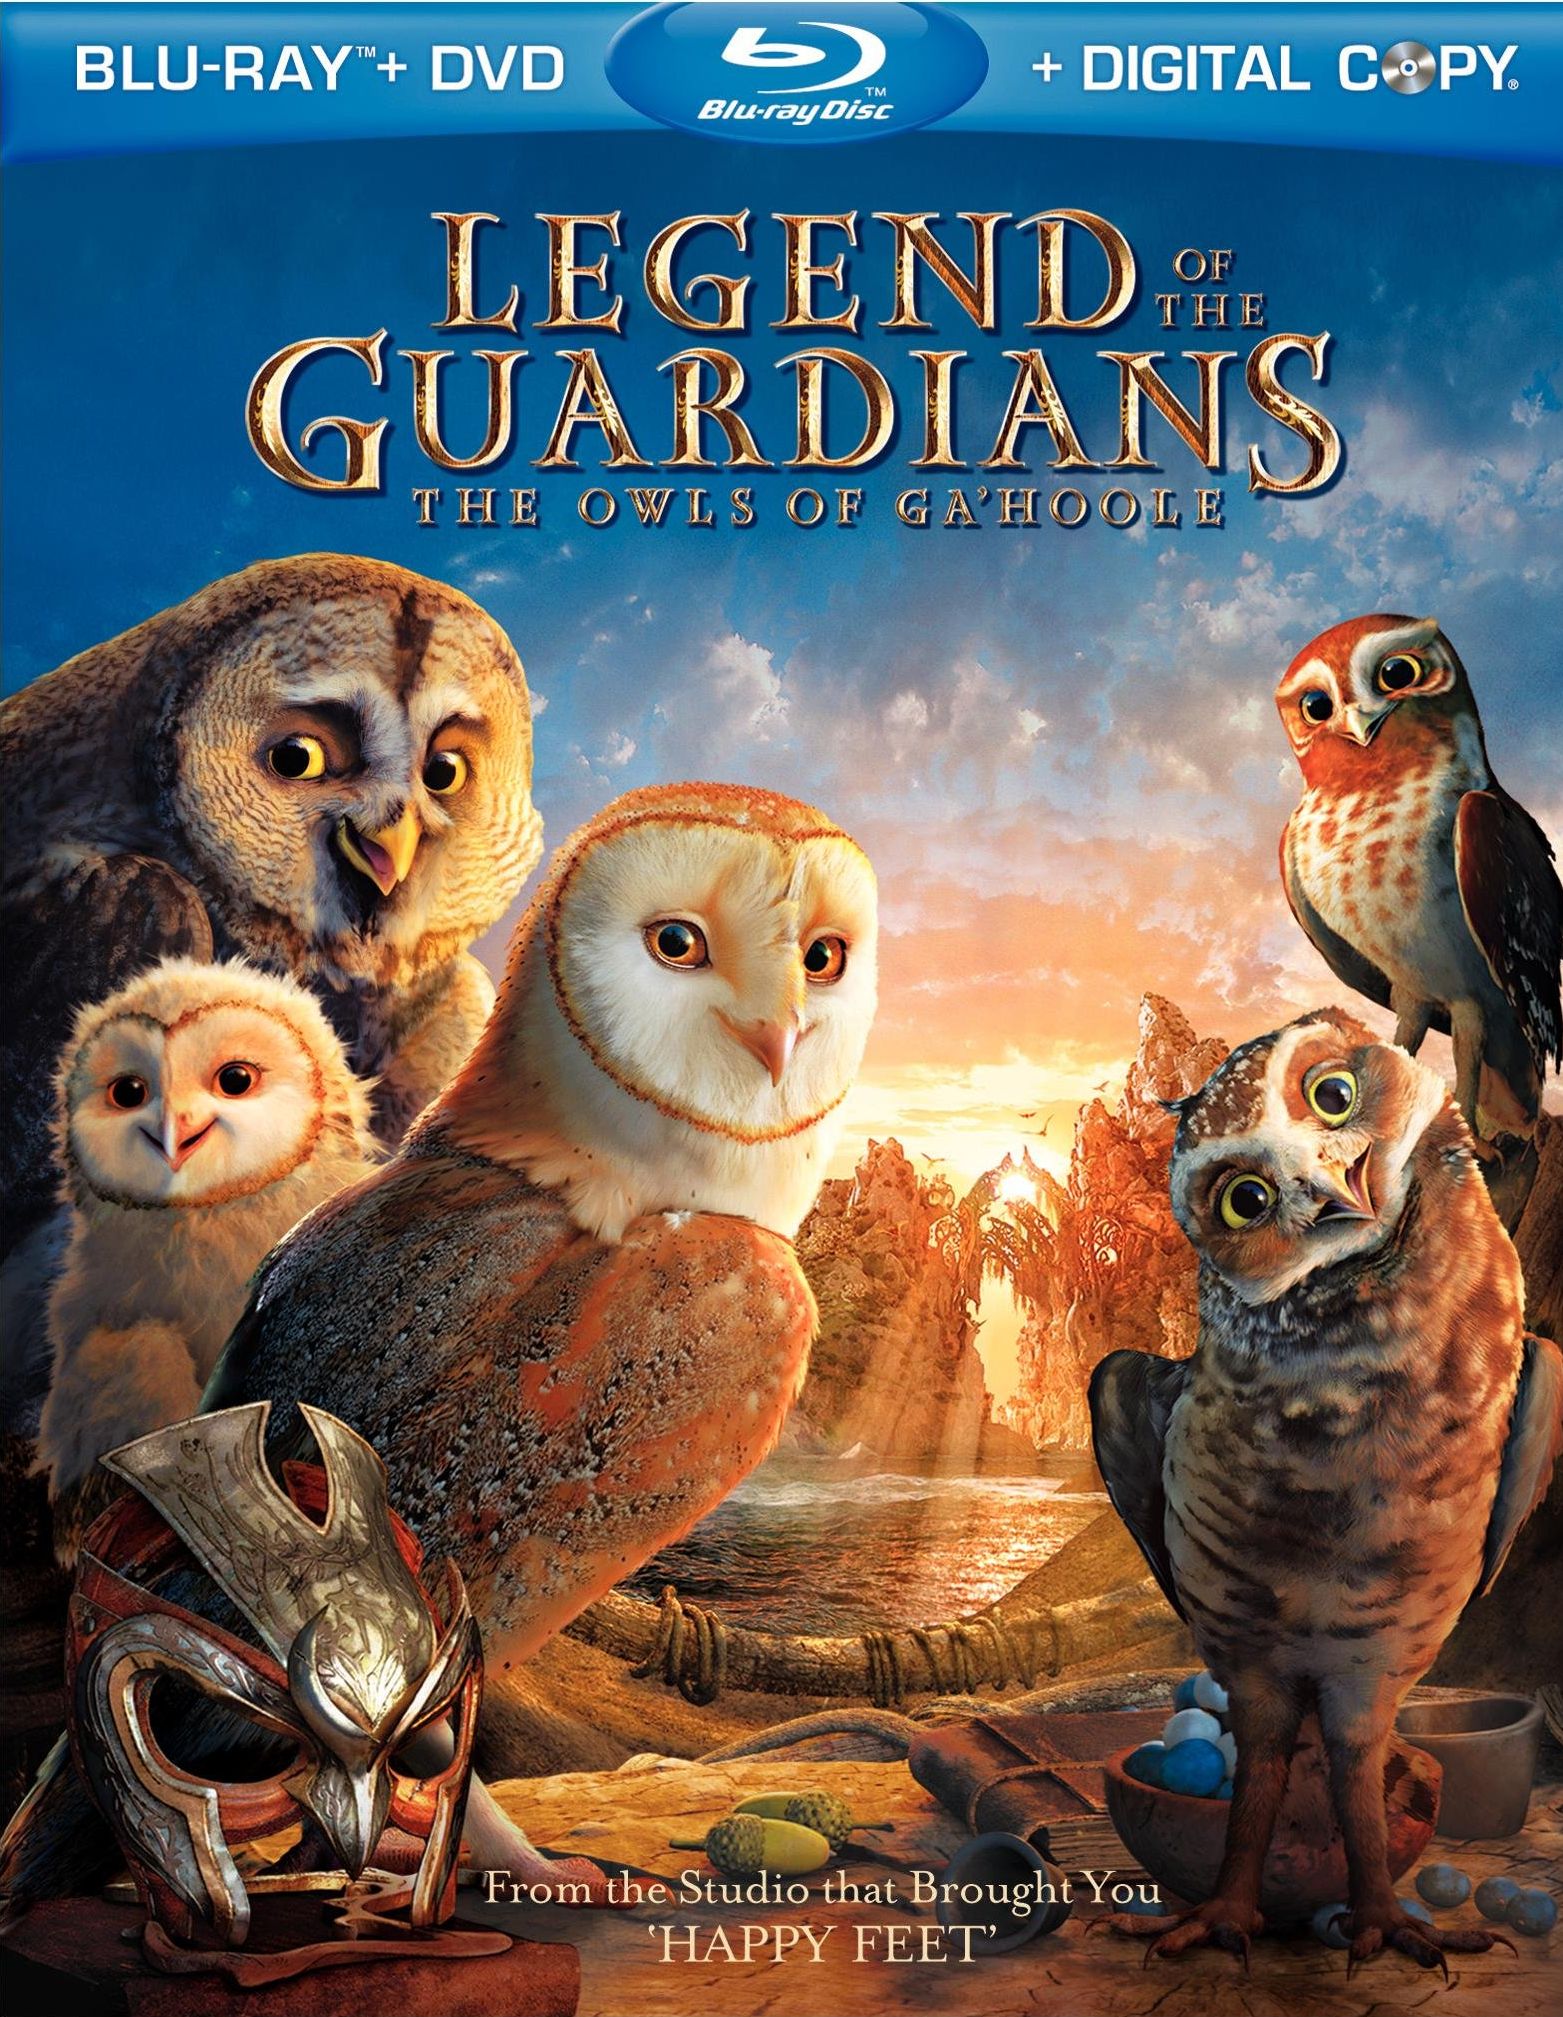 Legend Of The Guardians: The Owls Of Ga'Hoole #2